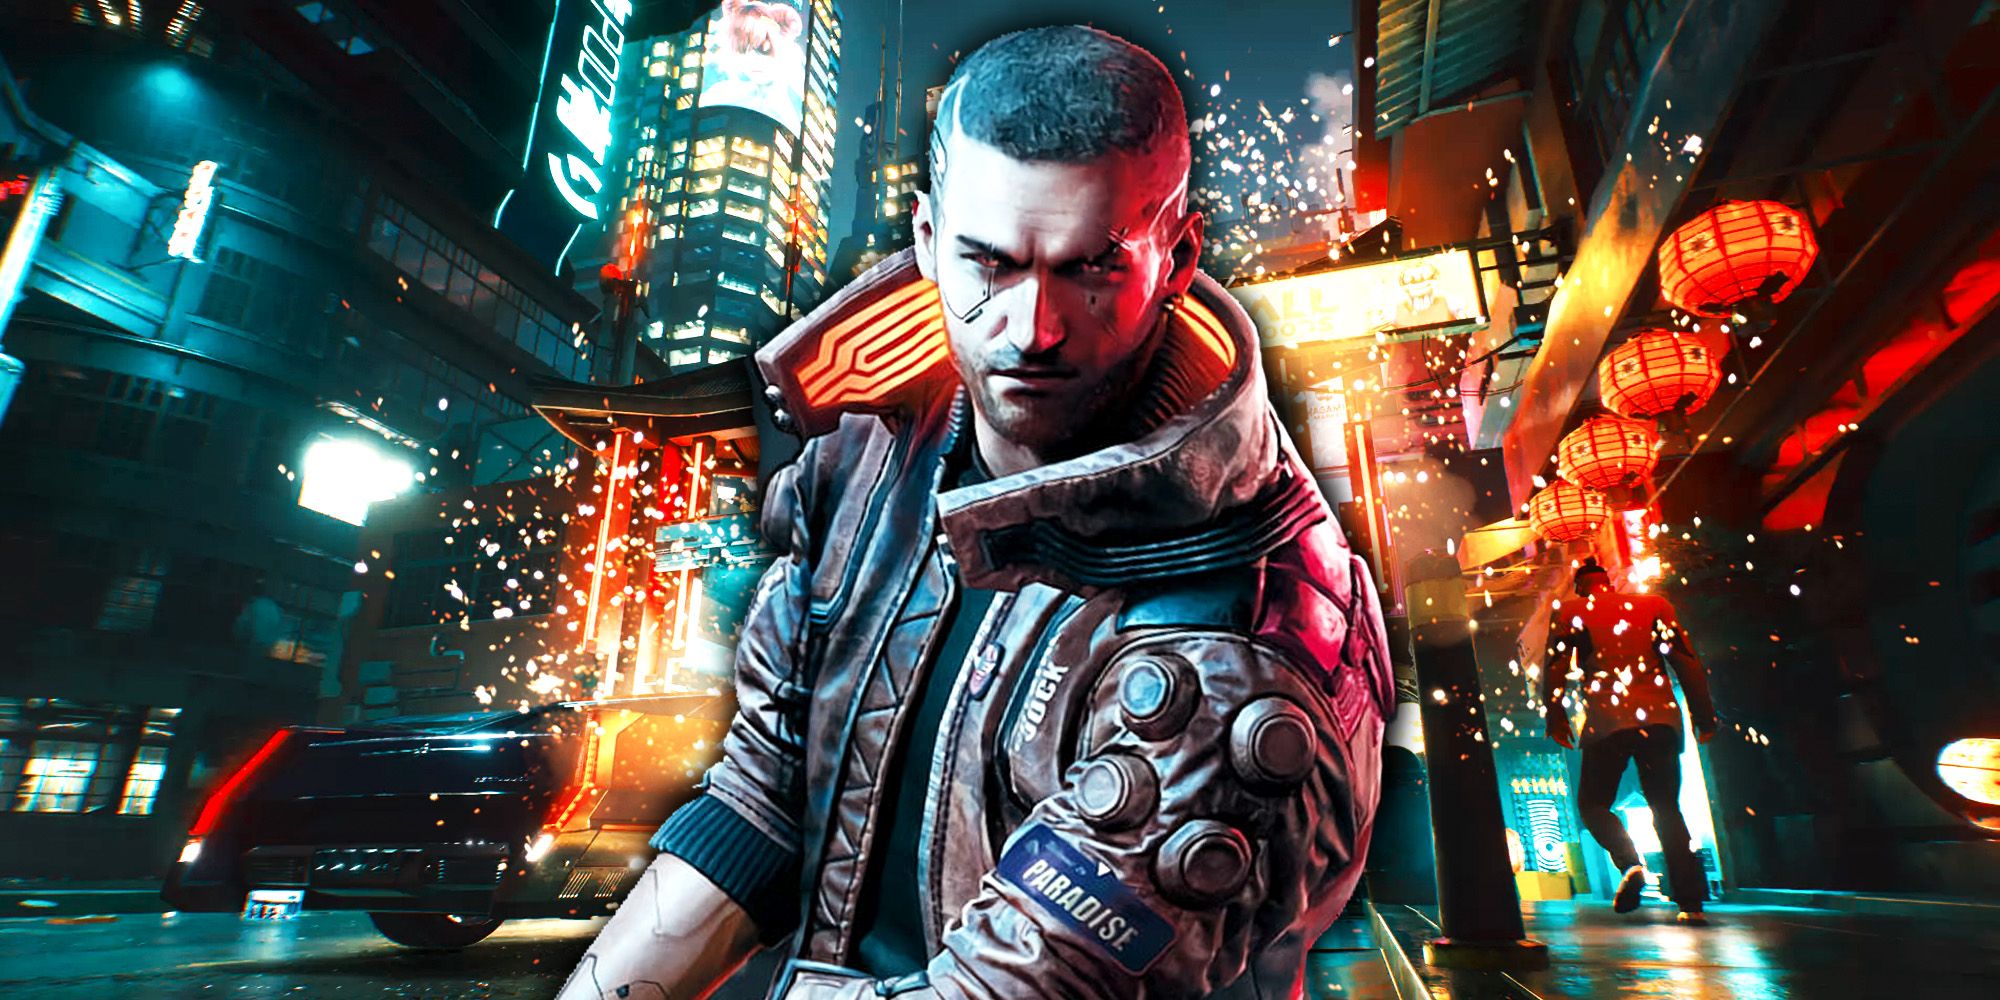 V with explosions around him in Night City in Cyberpunk 2077